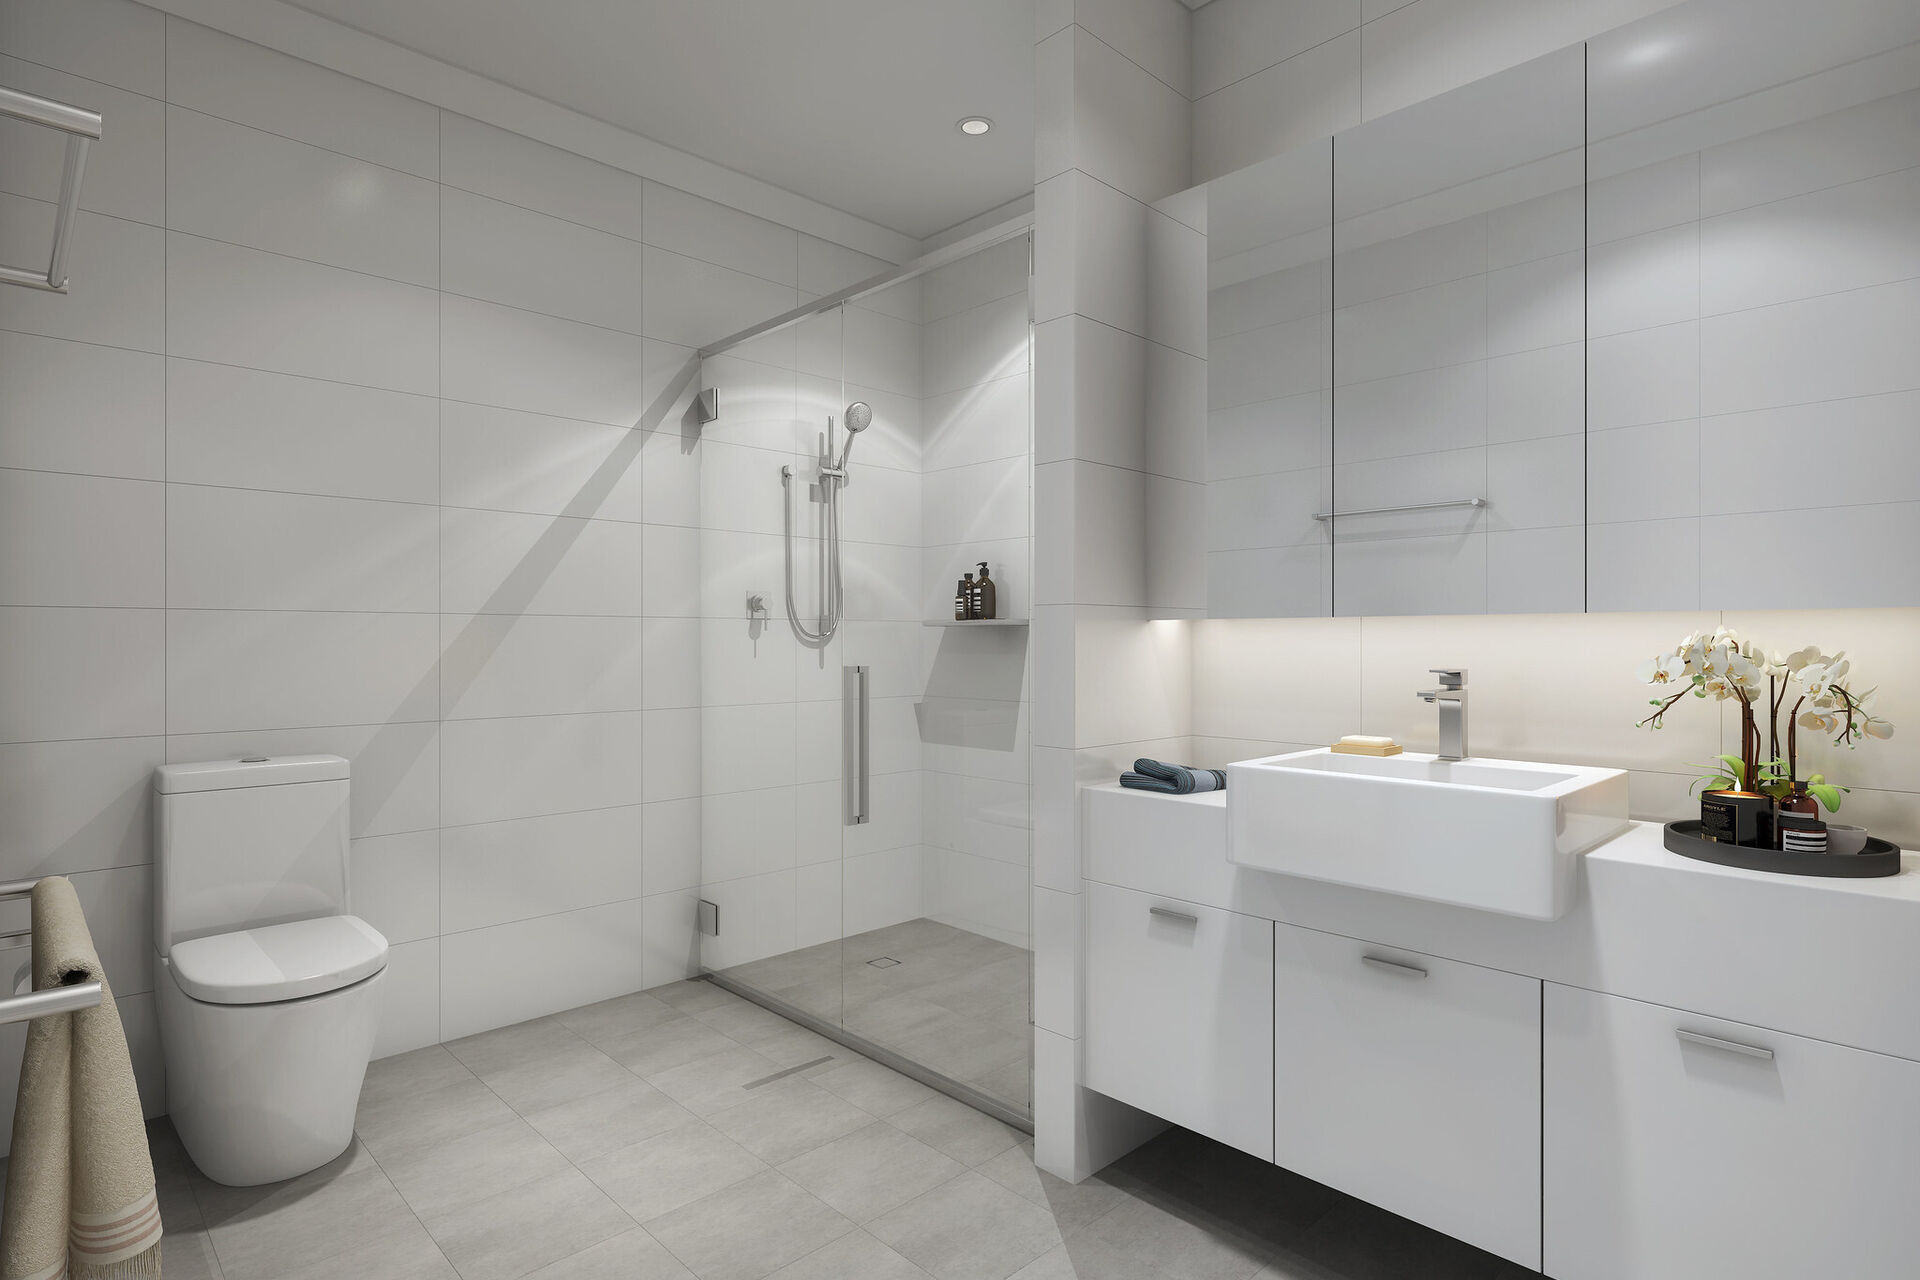 modern bathroom of retirement village apartment with floor to ceiling white tiles baptistcare maranoa village in alstonville allowing over 55s to downsizing opportunities